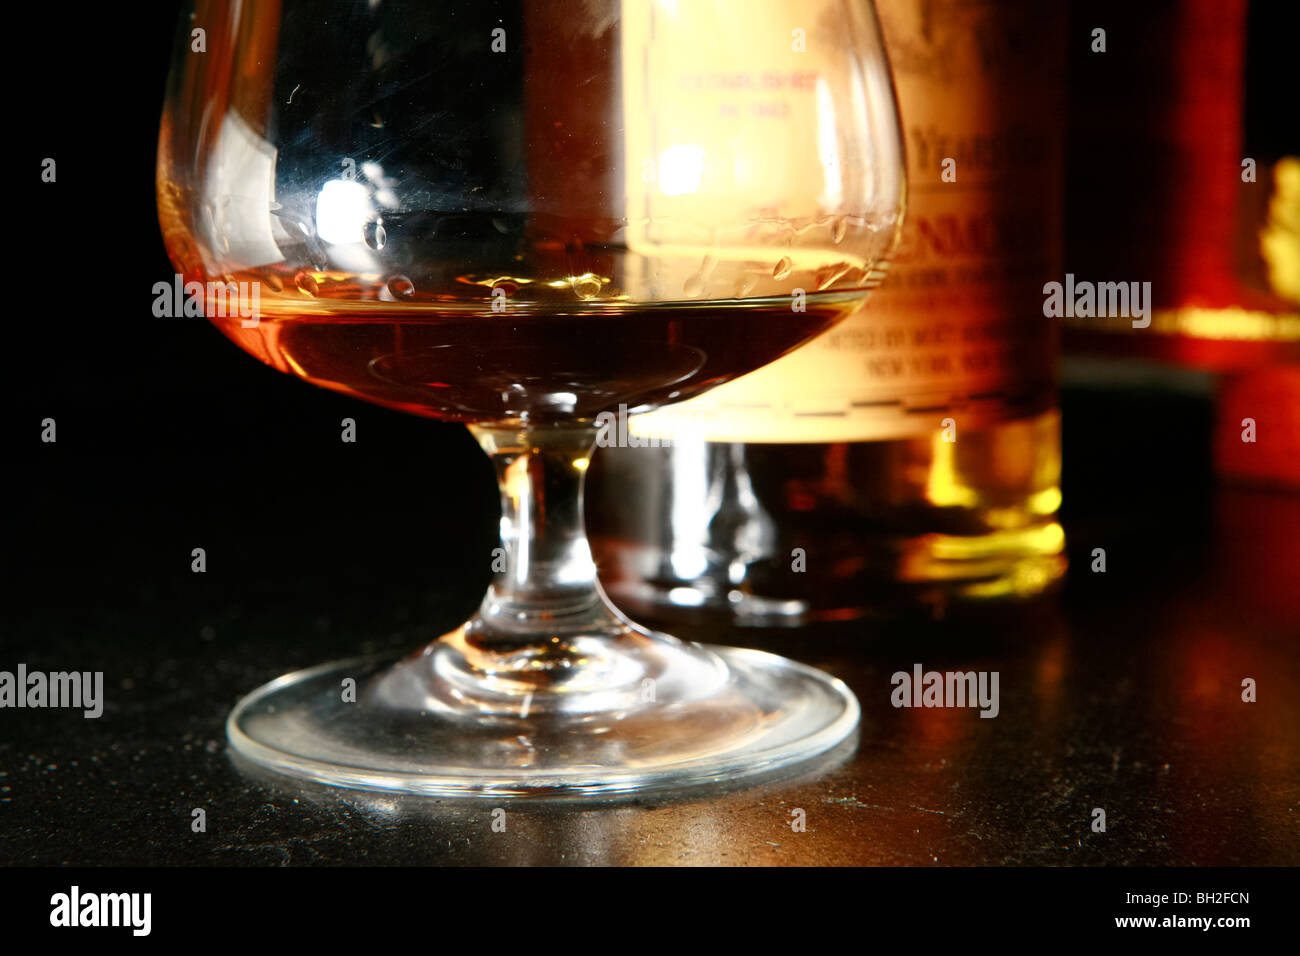 Bottle of whisky in a New York city bar Stock Photo